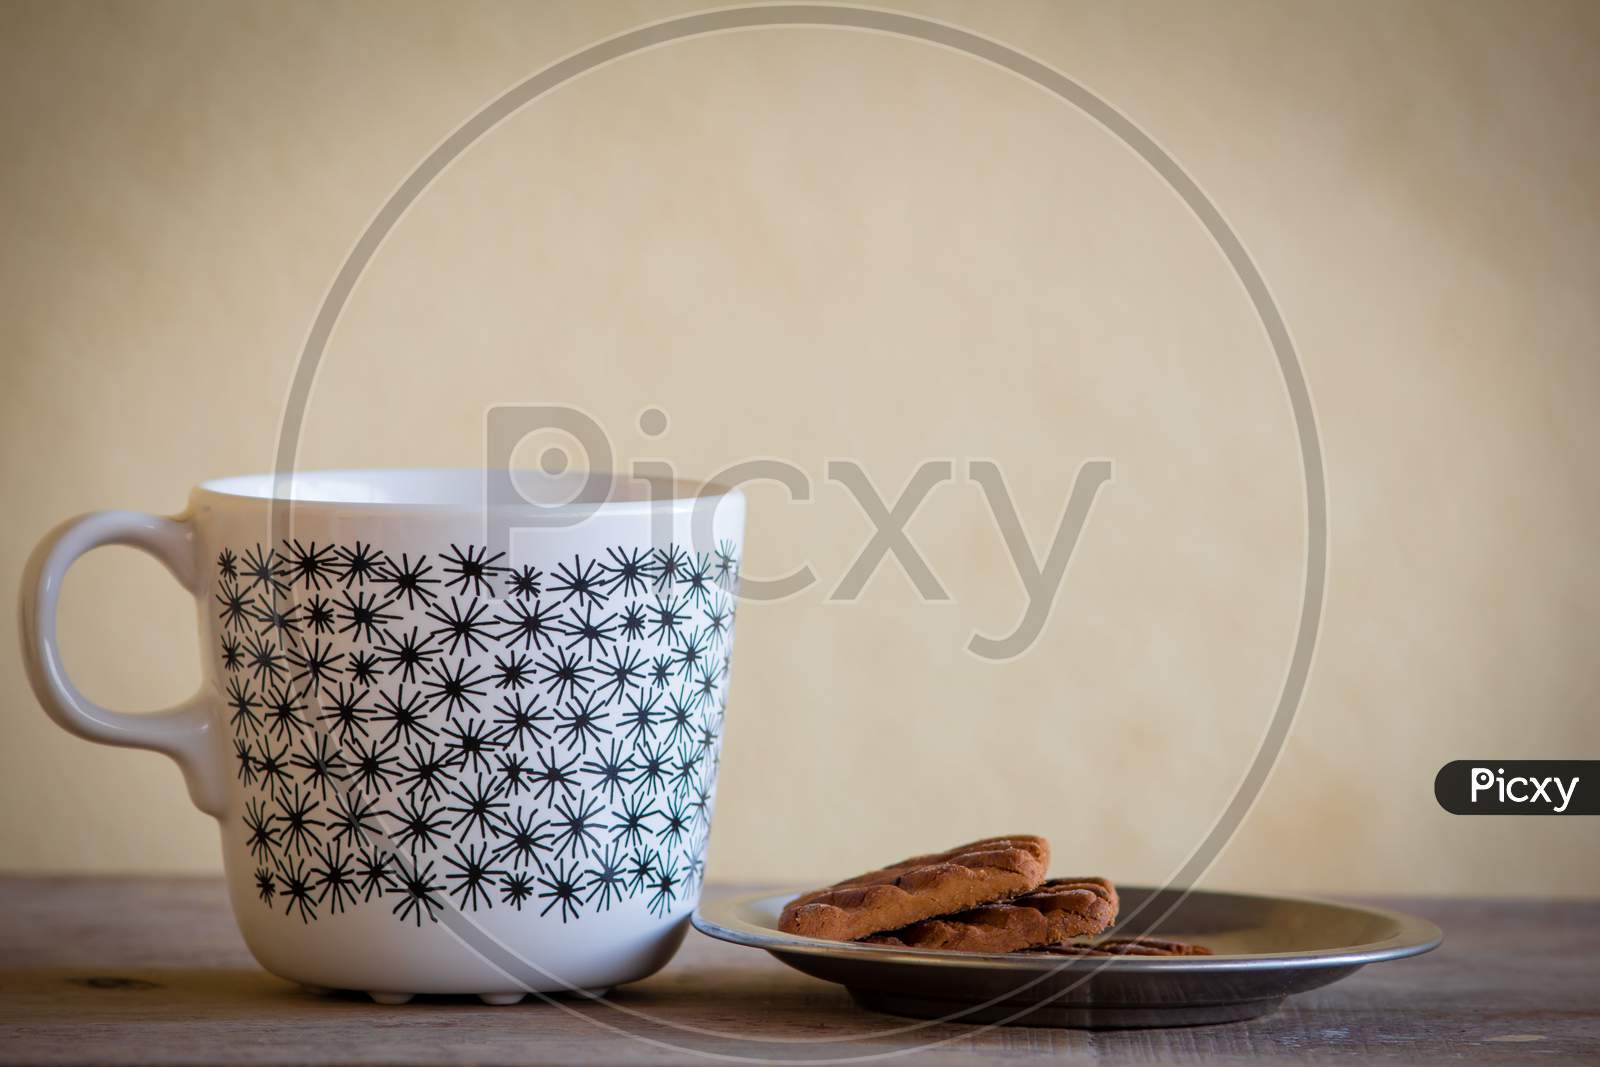 Mug With Coffee Or Tea Along With Biscuits. Refreshment During The Break From Work. Tea Break From Work